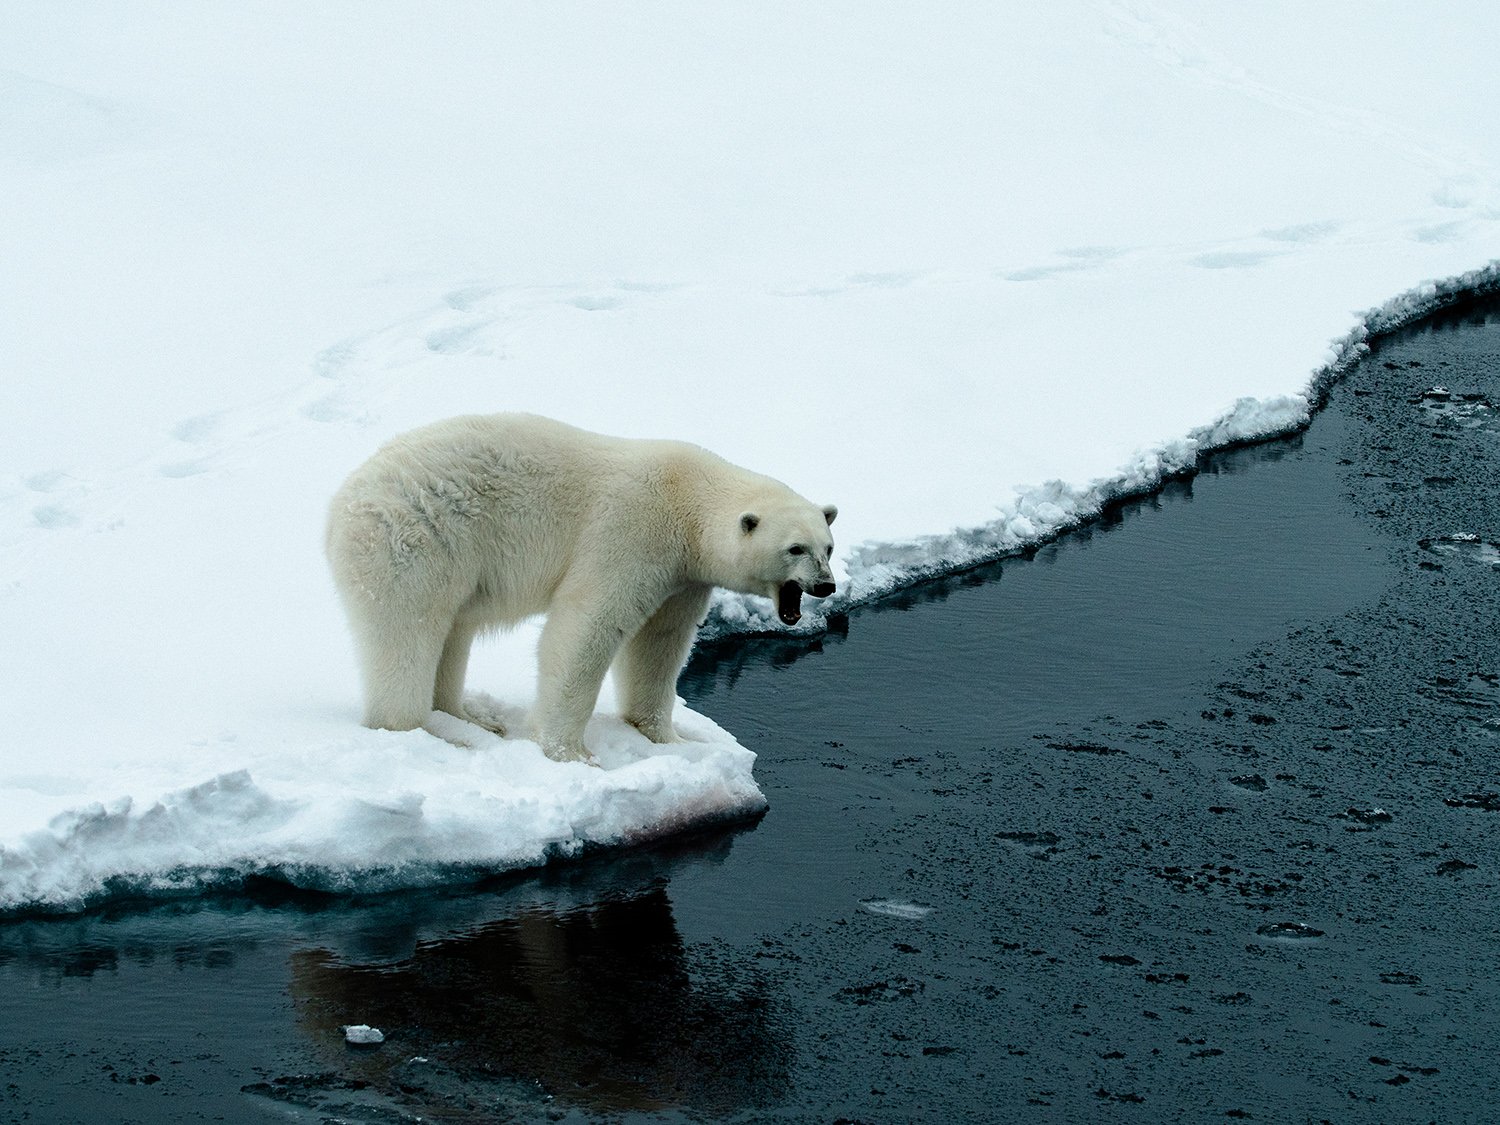 Polar bears are observed on many Arctic voyages, especially on expeditions to Greenland, Svalbard and the Canadian Arctic.